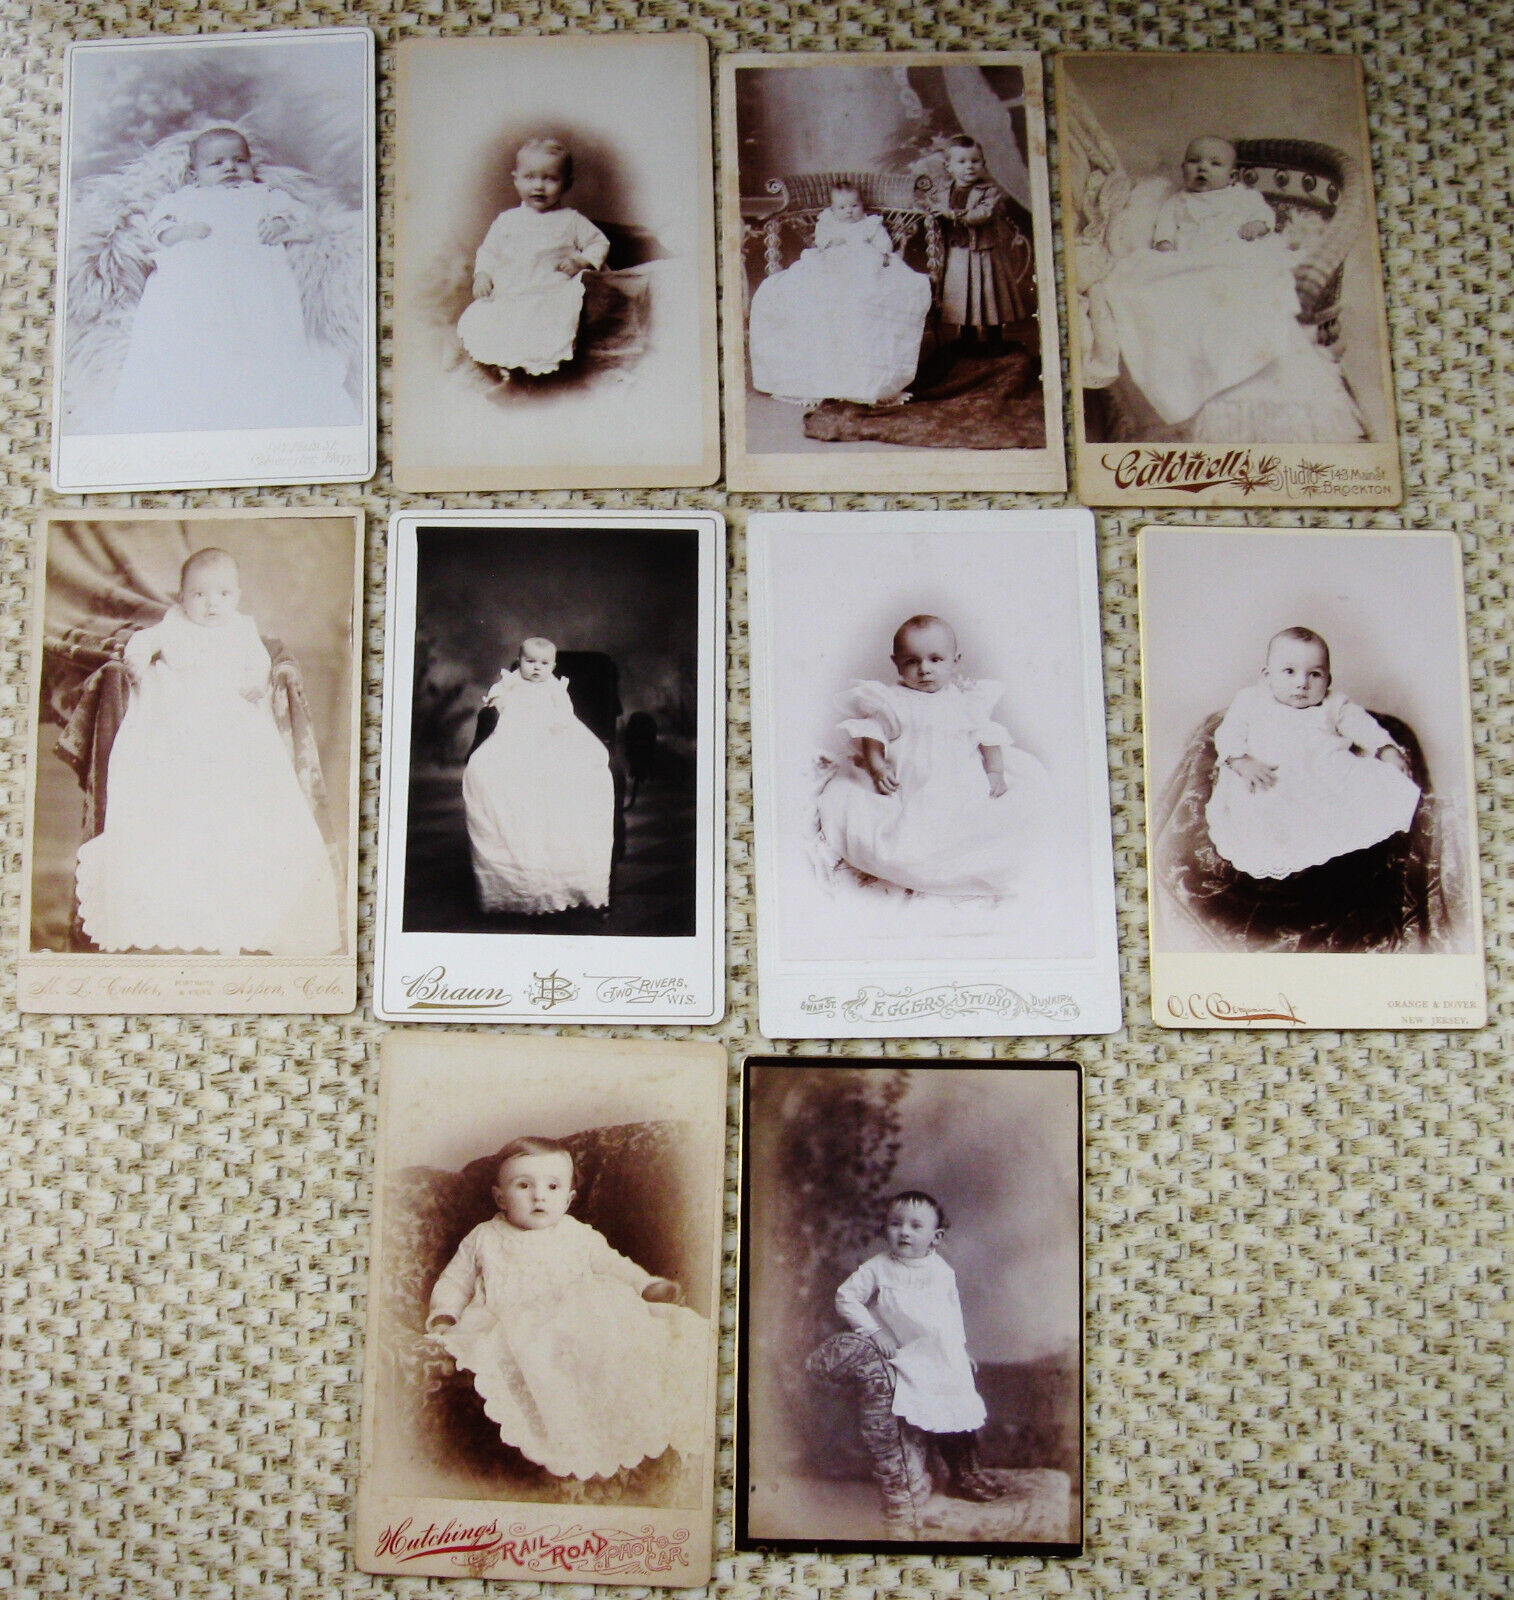 LOT OF 10 VARIOUS ANTIQUE CABINET PHOTOS OF DARLING INFANTS IN CHRISTENING GOWNS